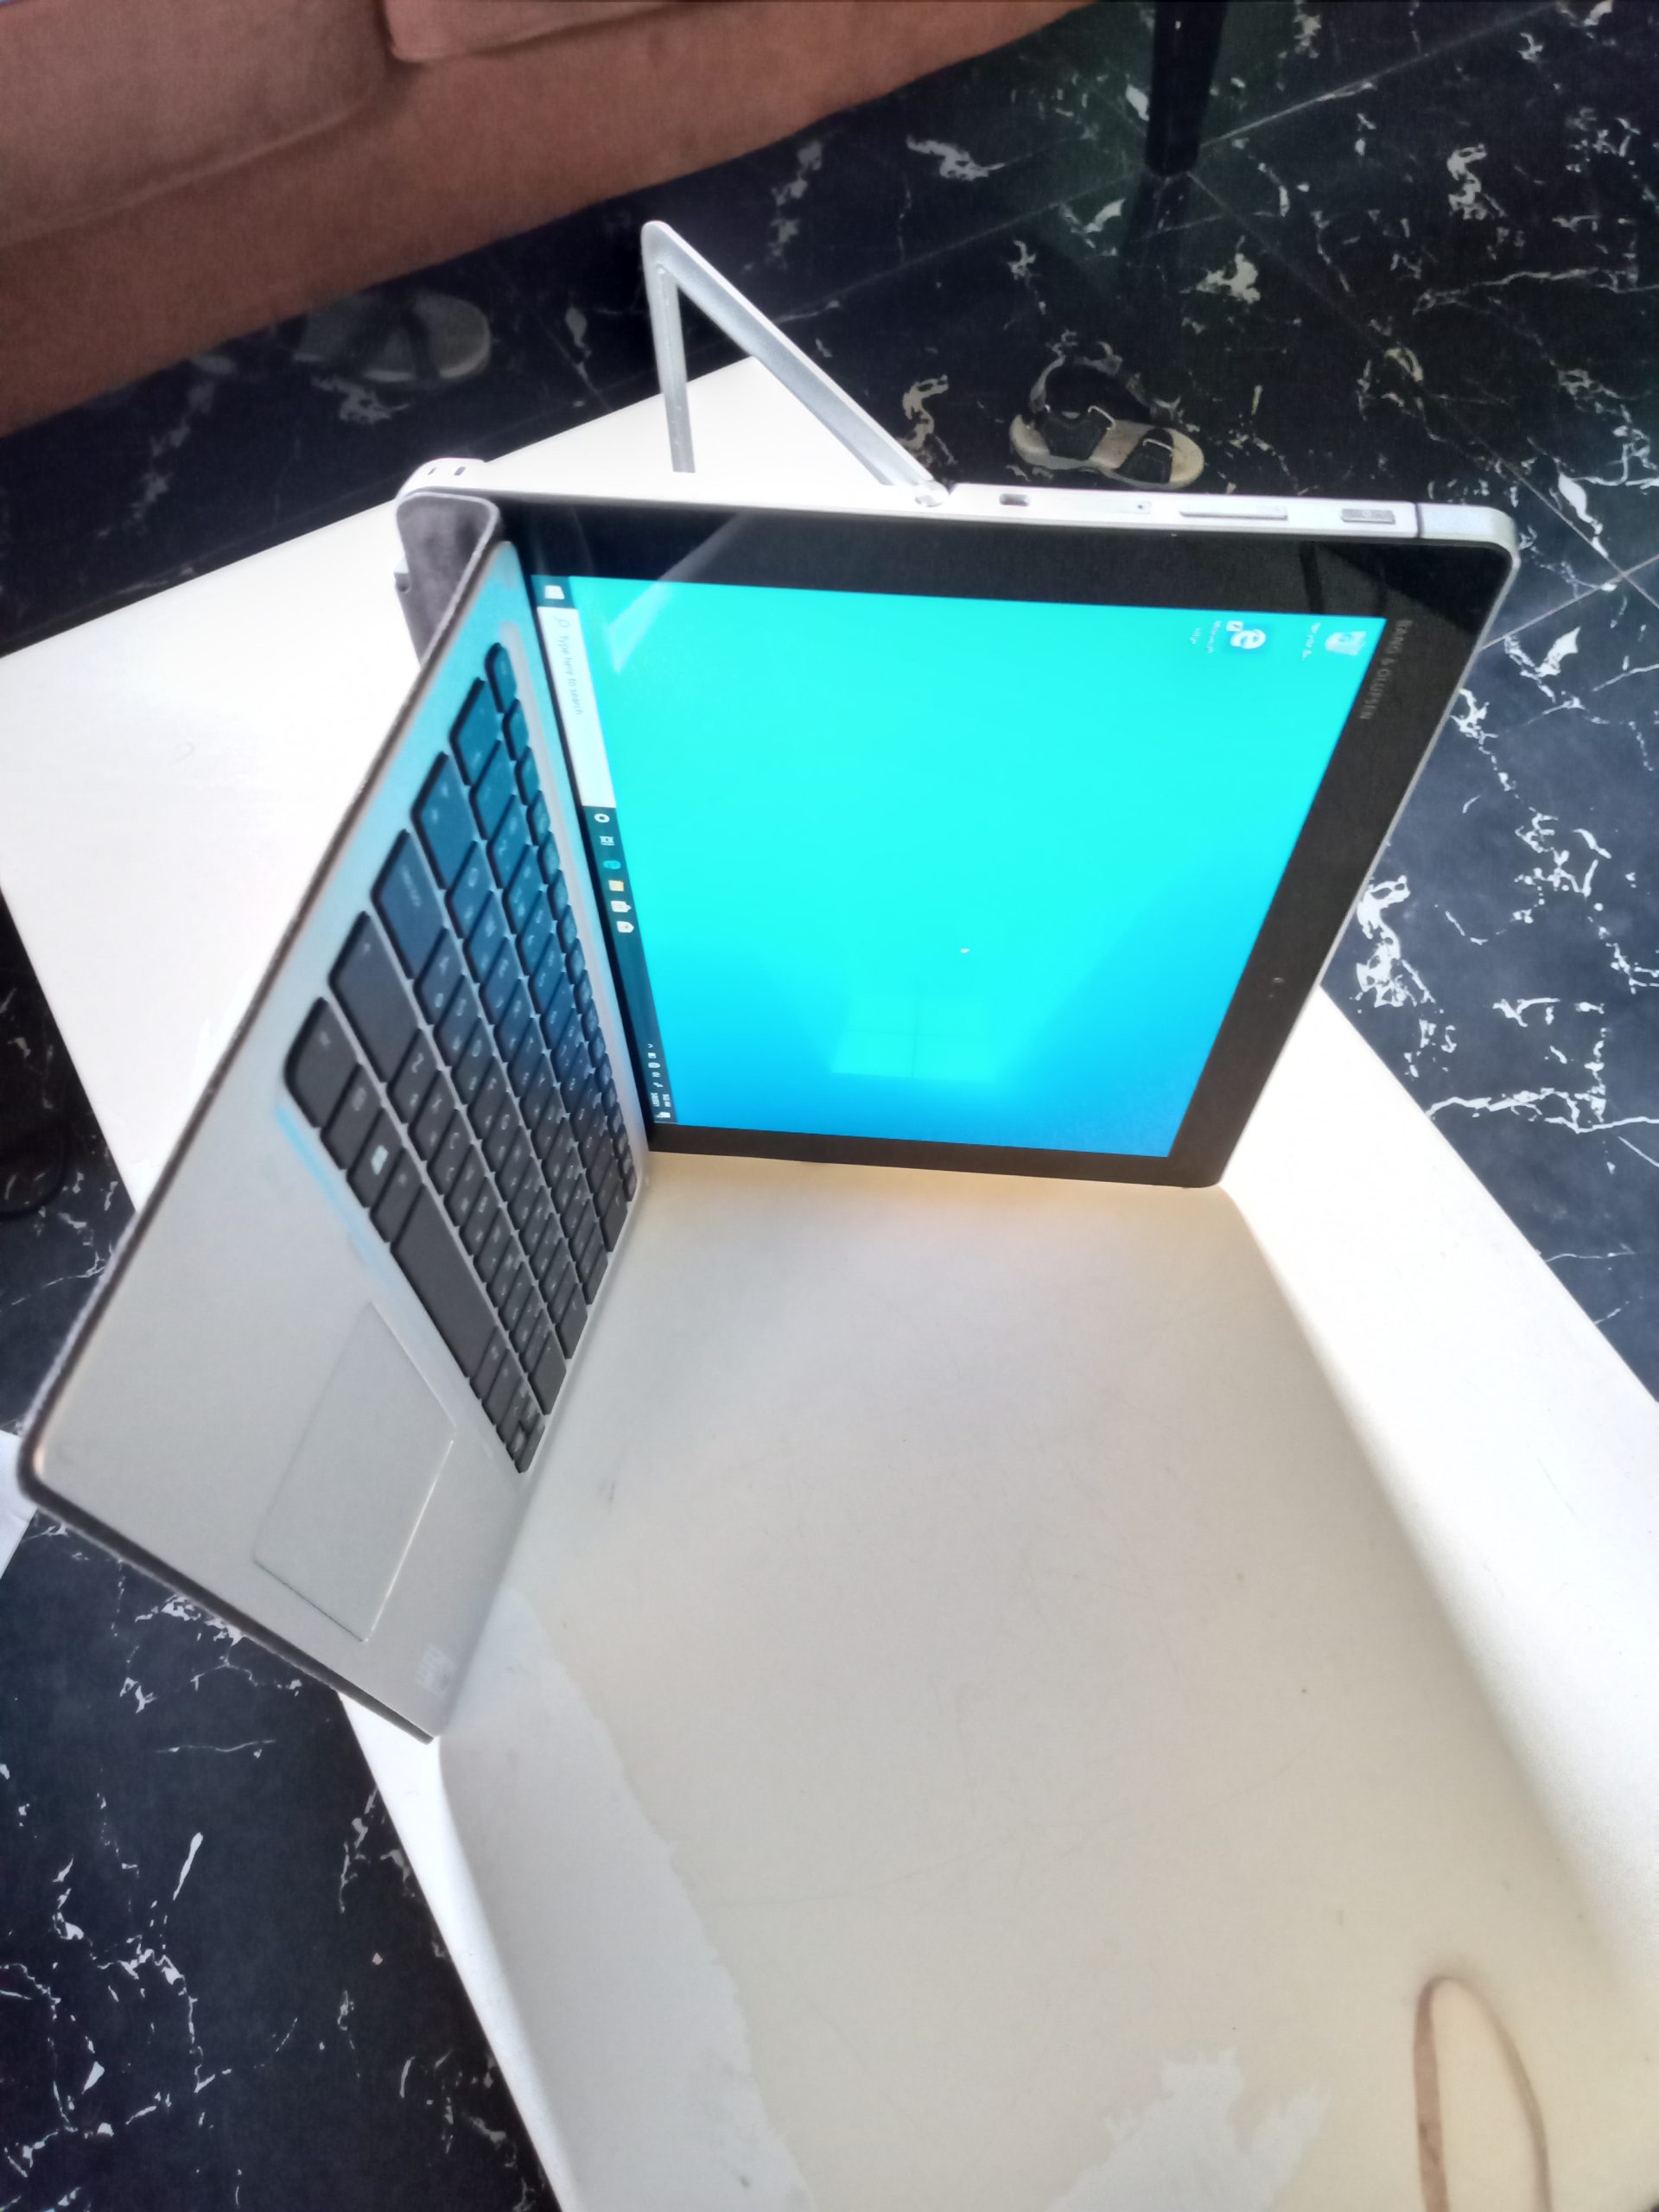 Cheap uk used hp x2 1012 laptop for sale in lagos core M5 , 256GB ssd , SLIM Keypadlight gbn mobile computer store usedcomputer,laptop,tocumbo,computervillage,ikeja,oshodi,arena,army,lagos,ladipo,ukused,londonused,american used Laptop,secondhand,computerstore,computershop